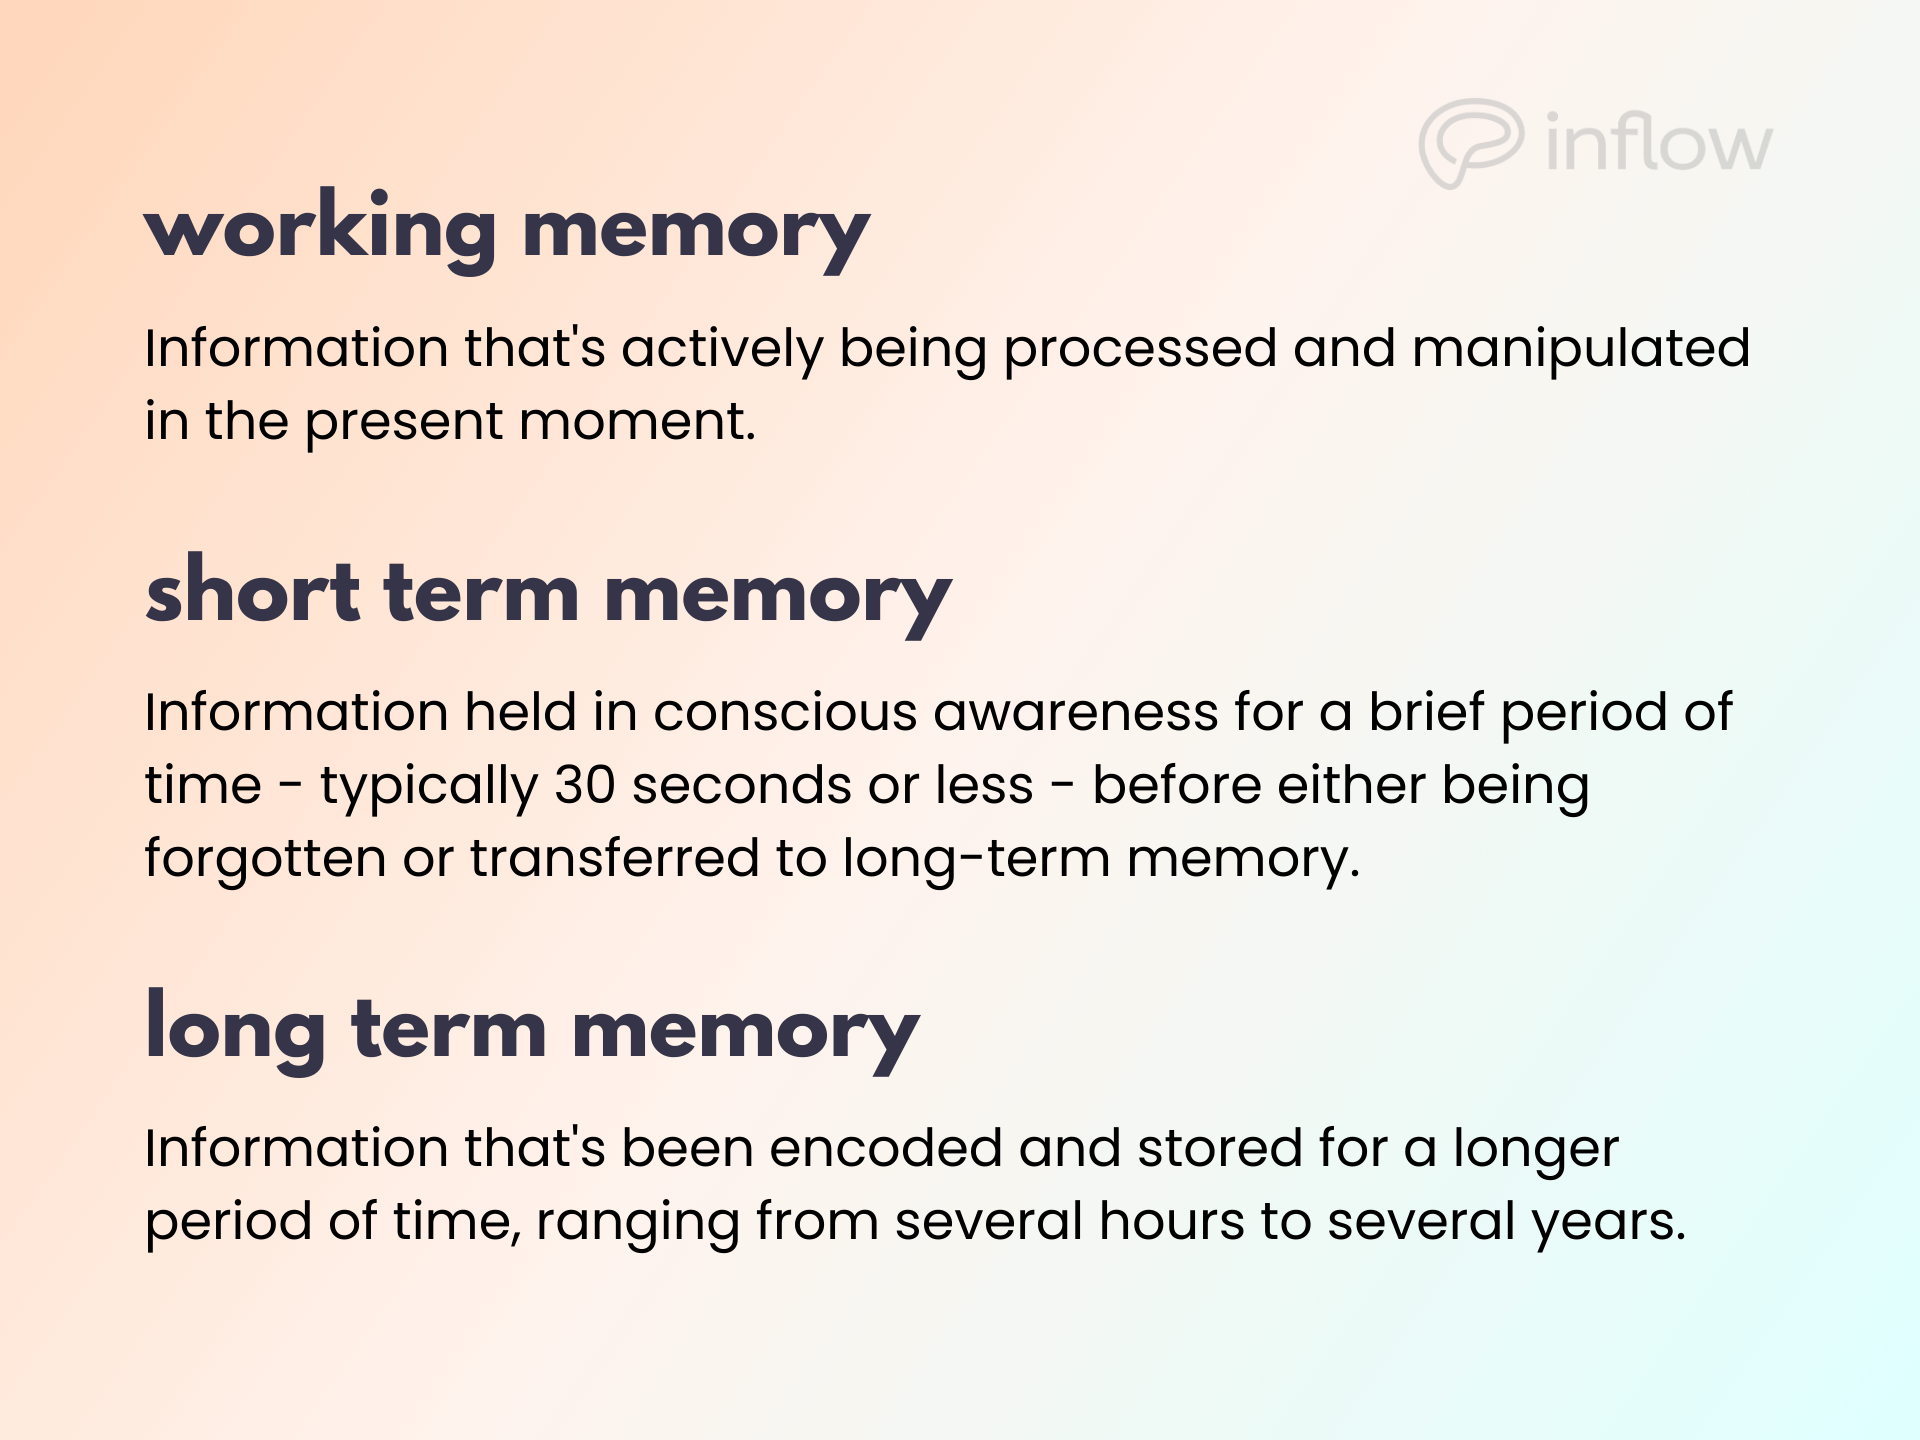 working memory: Information that's actively being processed and manipulated in the present moment. short term memory: Information held in conscious awareness for a brief period of time - typically 30 seconds or less - before either being forgotten or transferred to long-term memory. long term memory: Information that's been encoded and stored for a longer period of time, ranging from several hours to several years.